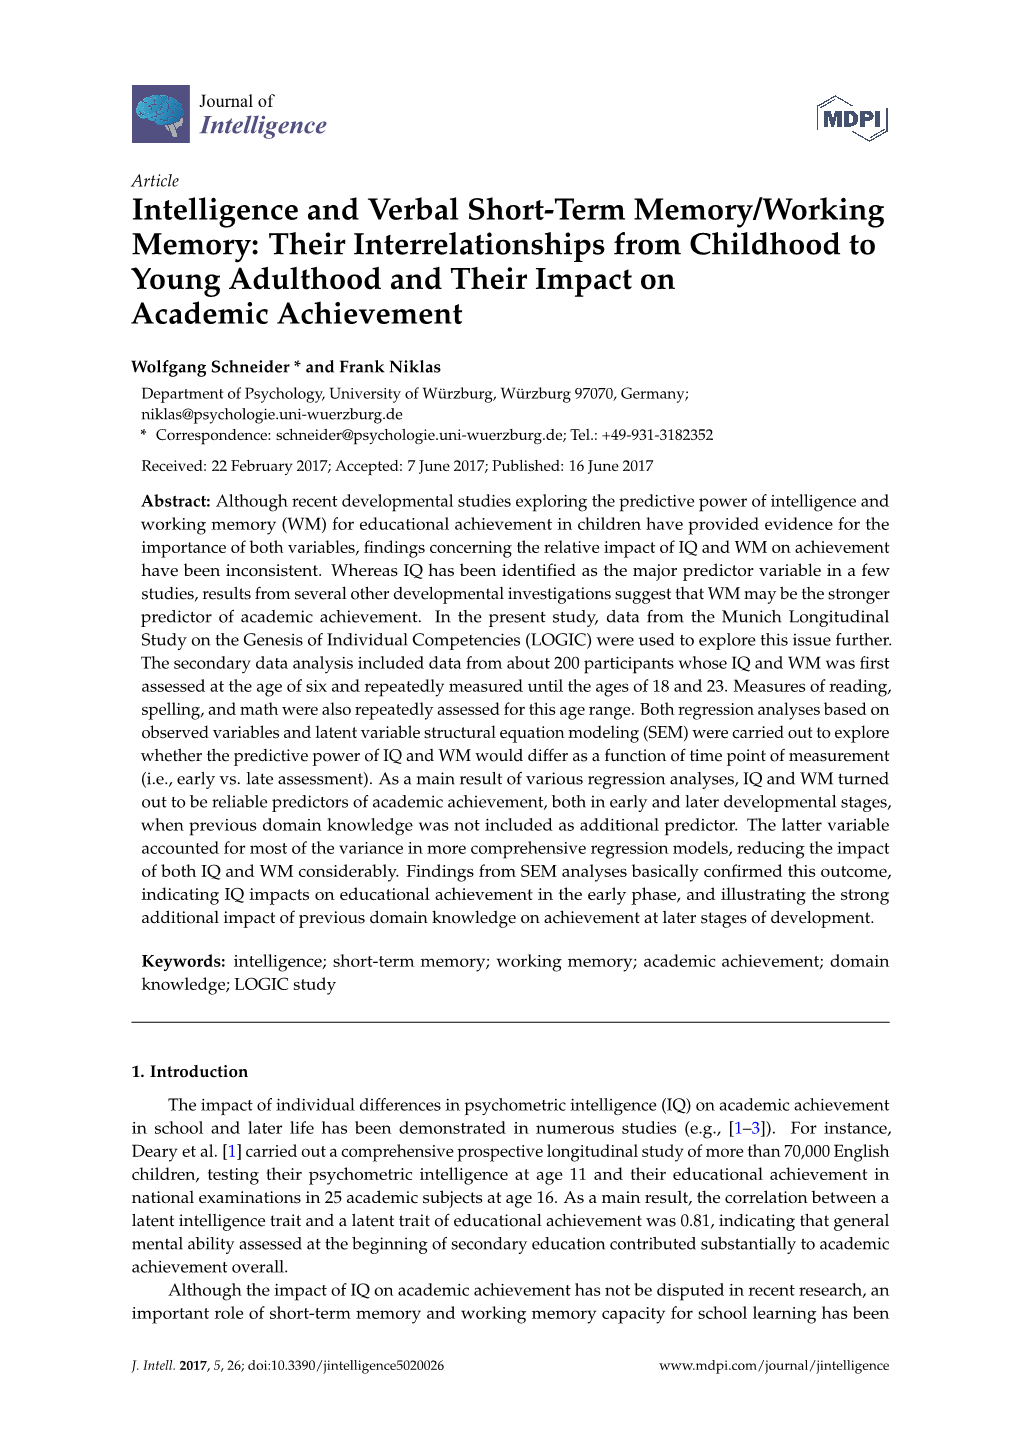 Intelligence and Verbal Short-Term Memory/Working Memory: Their Interrelationships from Childhood to Young Adulthood and Their Impact on Academic Achievement